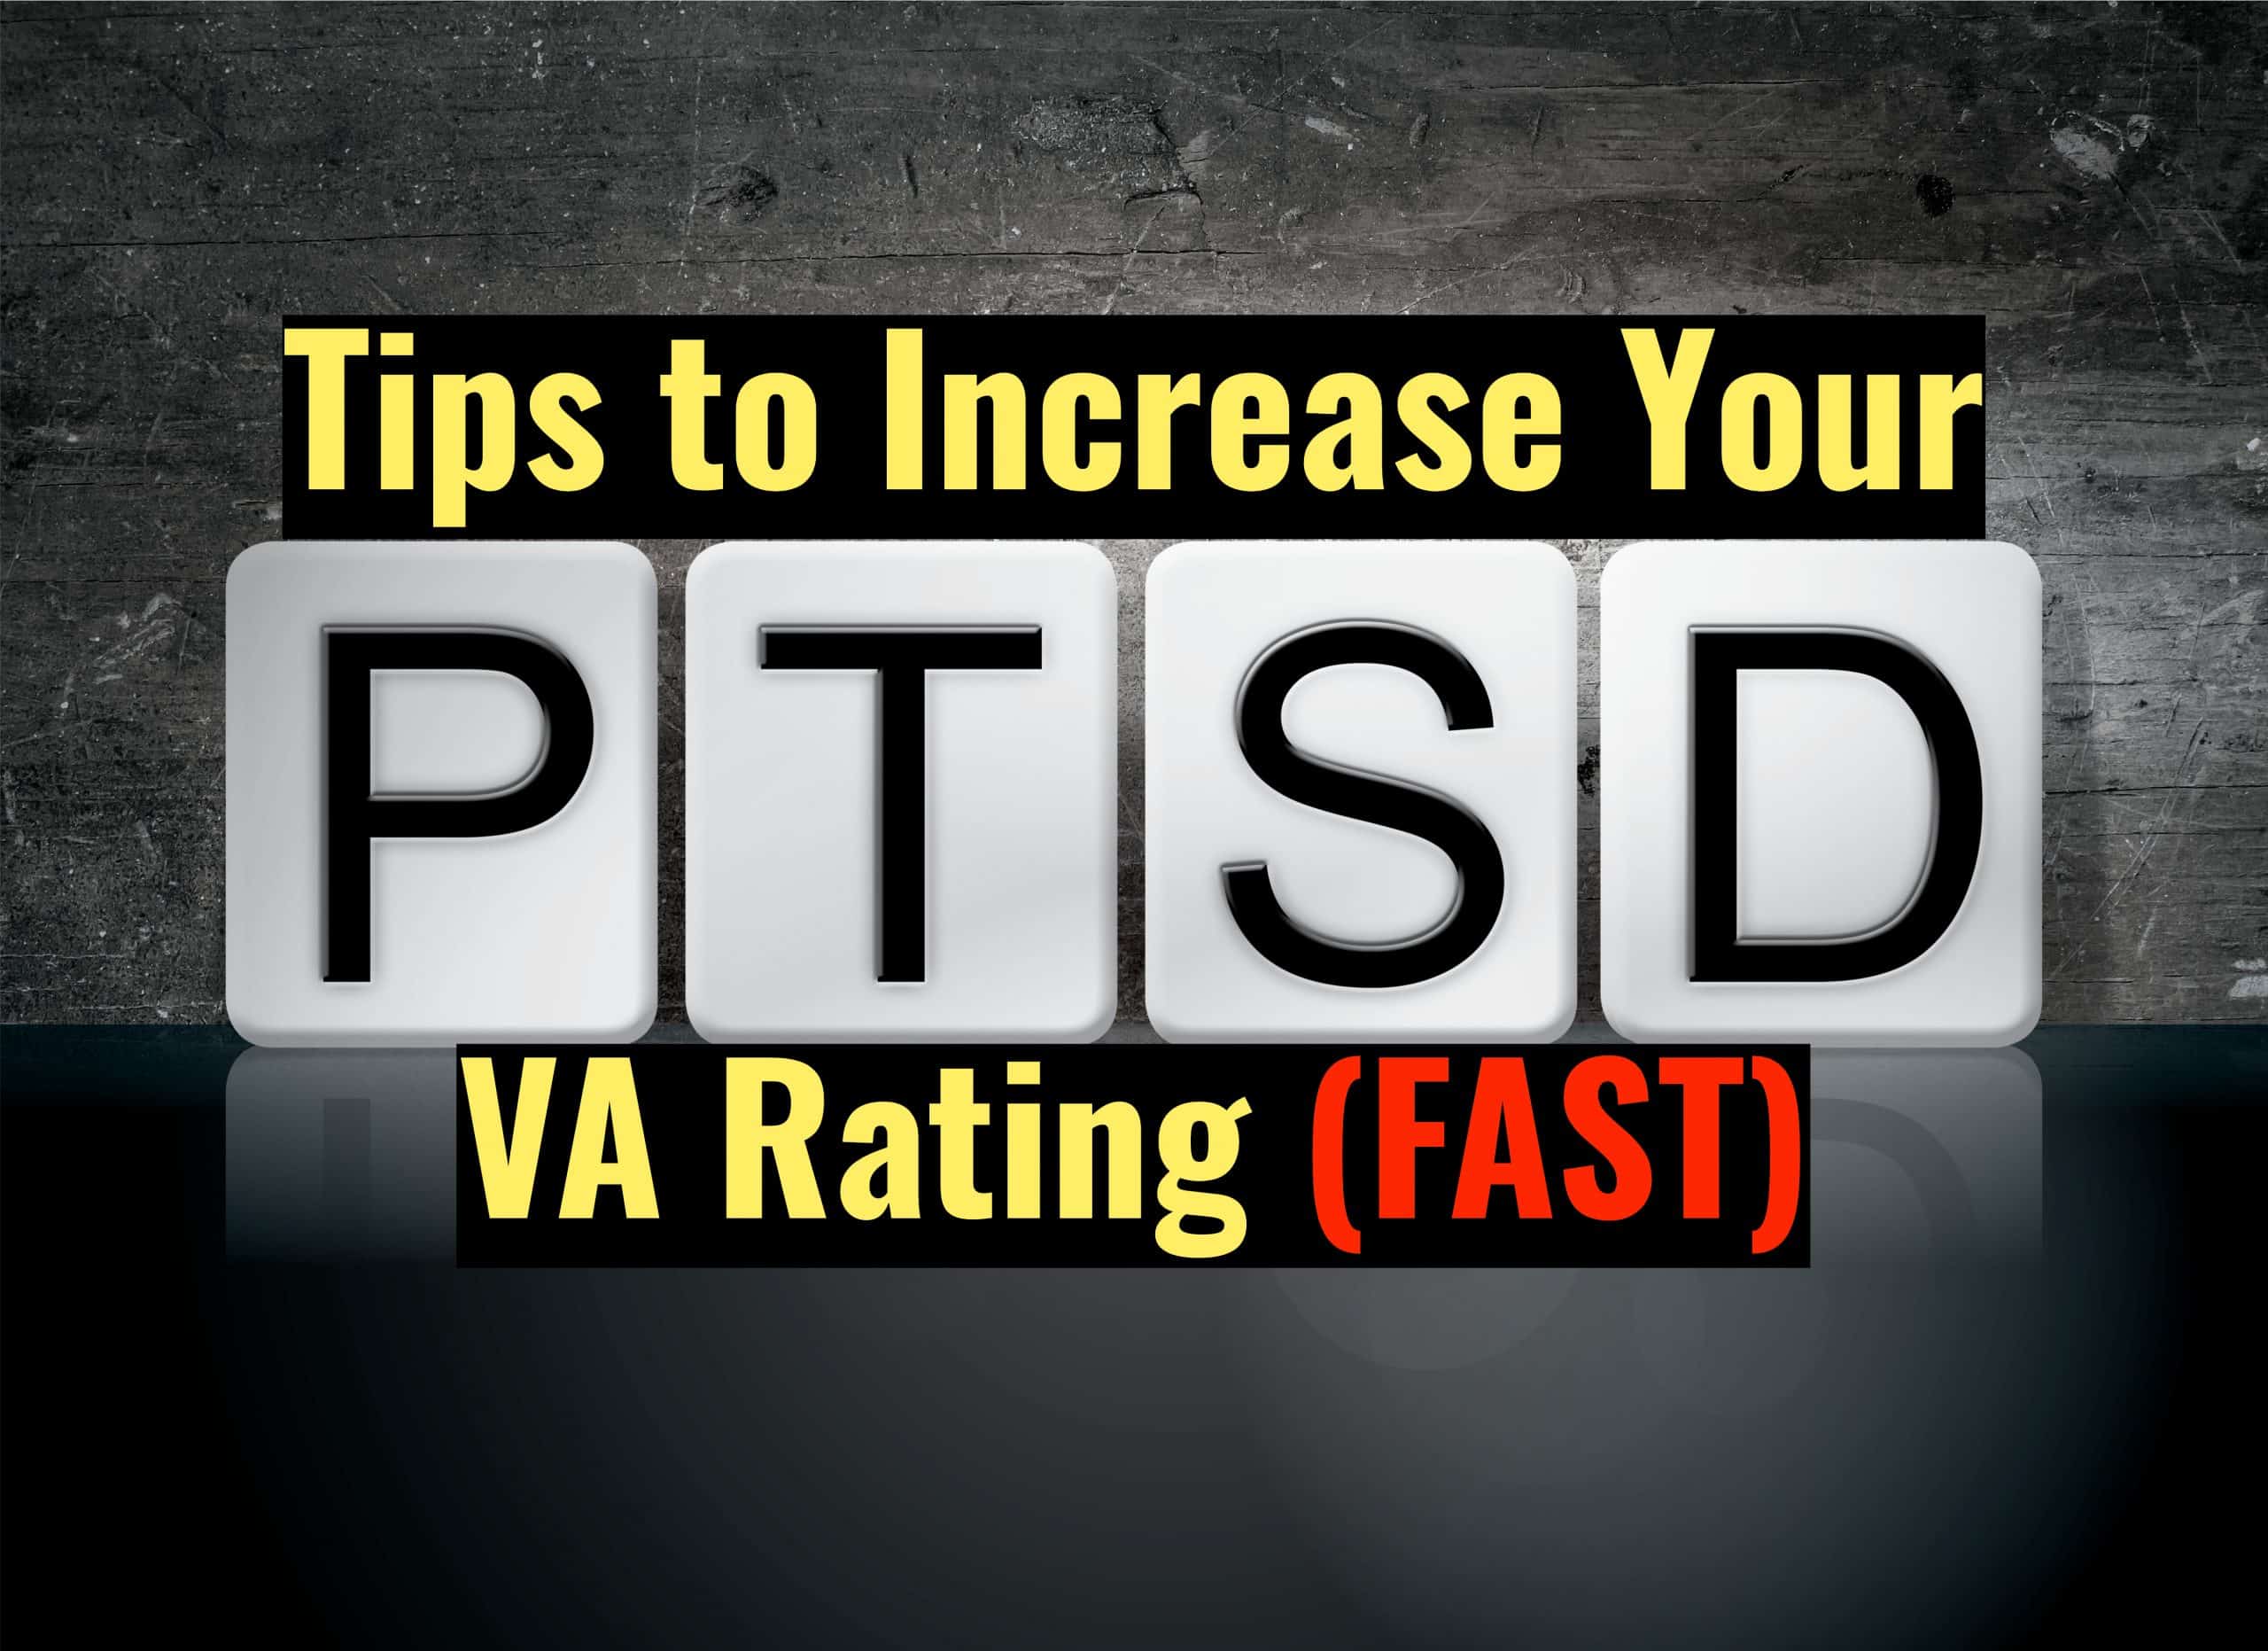 How to Increase VA Disability Rating for PTSD